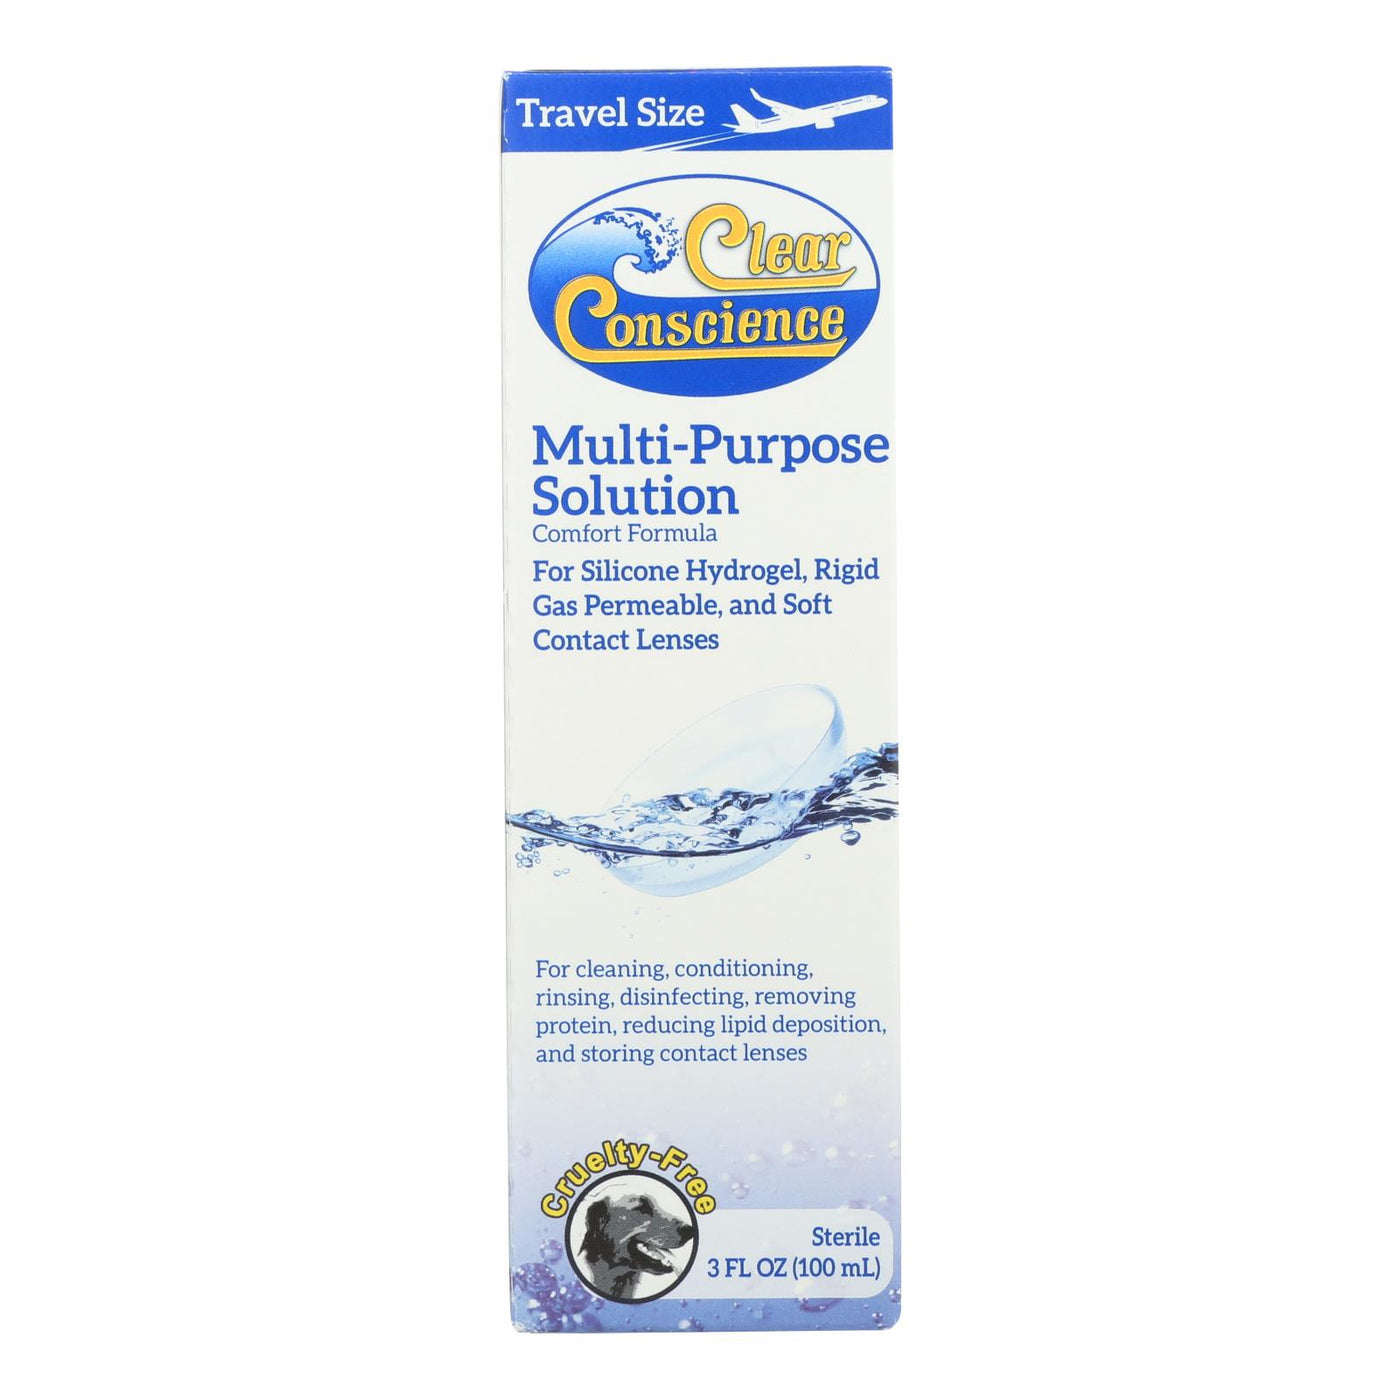 Clear Conscience Multi Purpose Contact Lens Solution - Travel Size - 3 Oz | OnlyNaturals.us